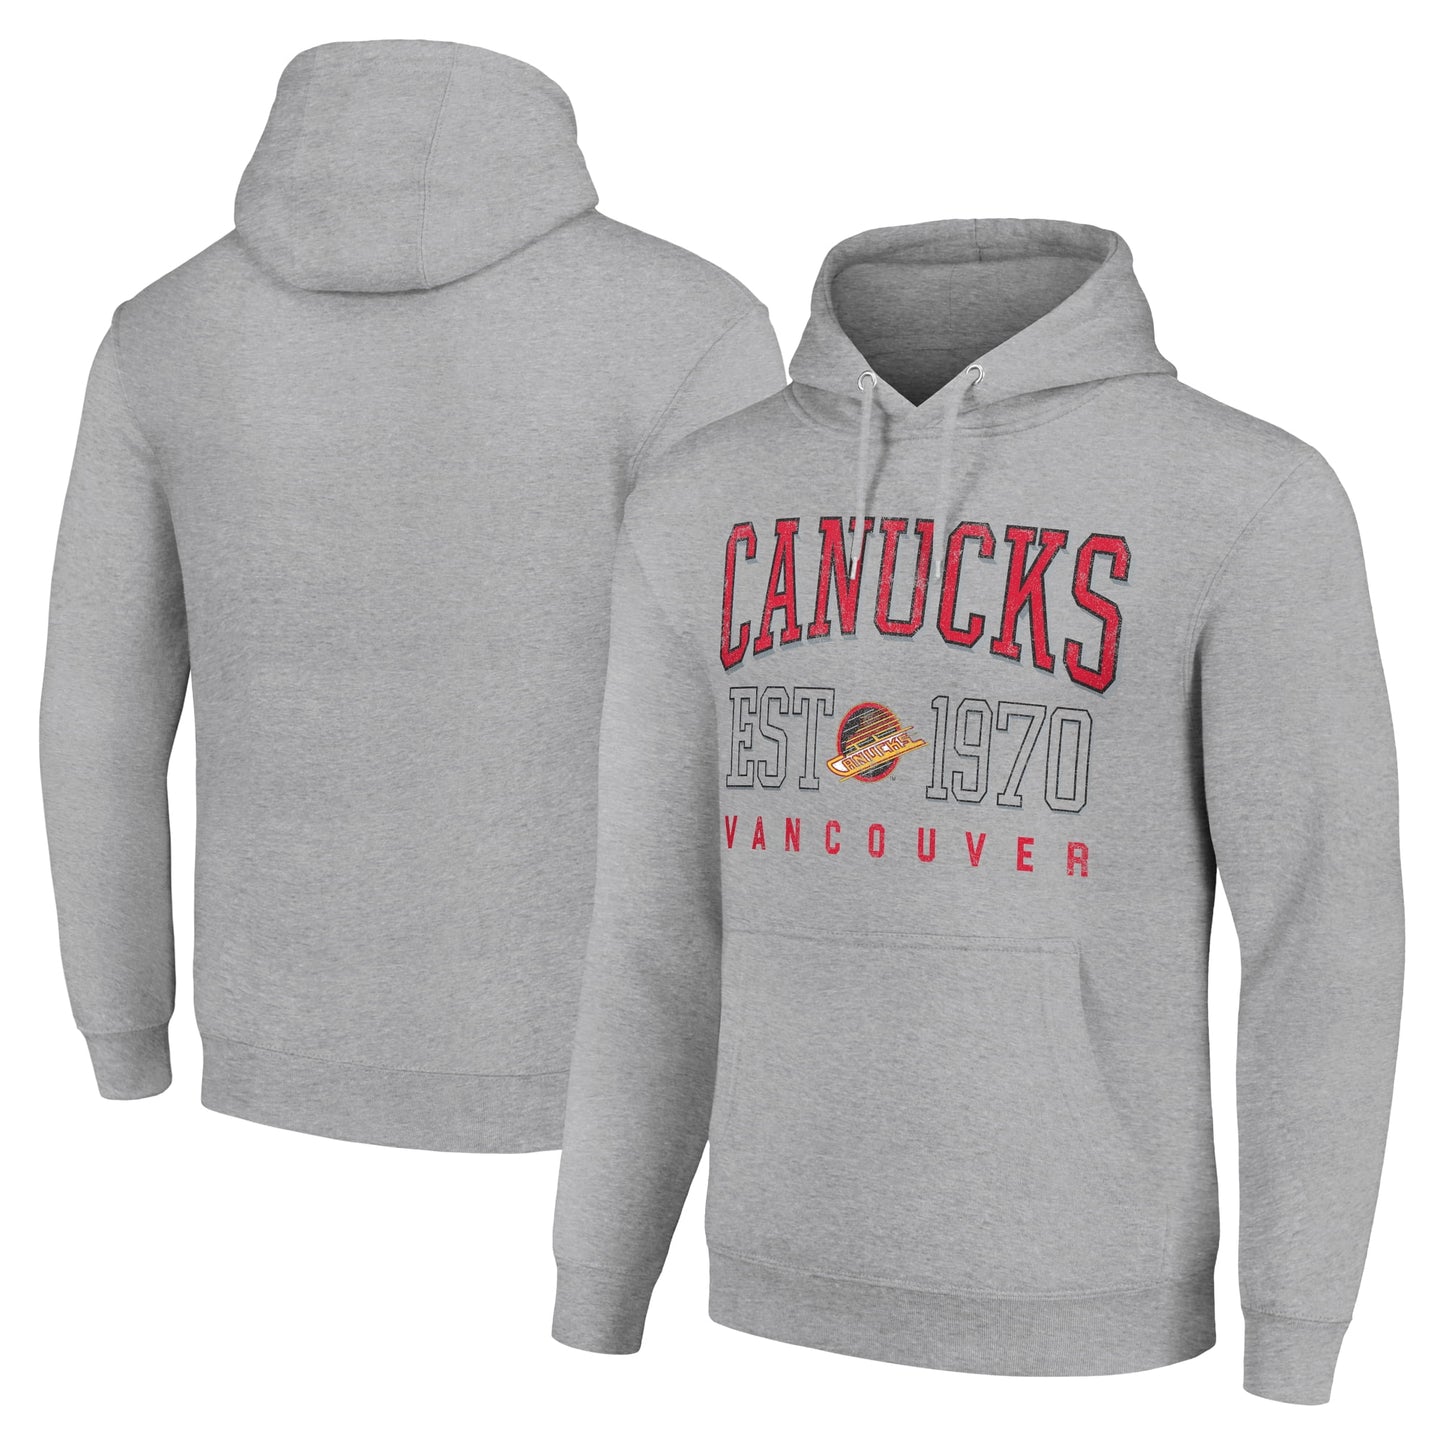 Men's Starter Heather Gray Vancouver Canucks Retro Graphic Pullover Hoodie